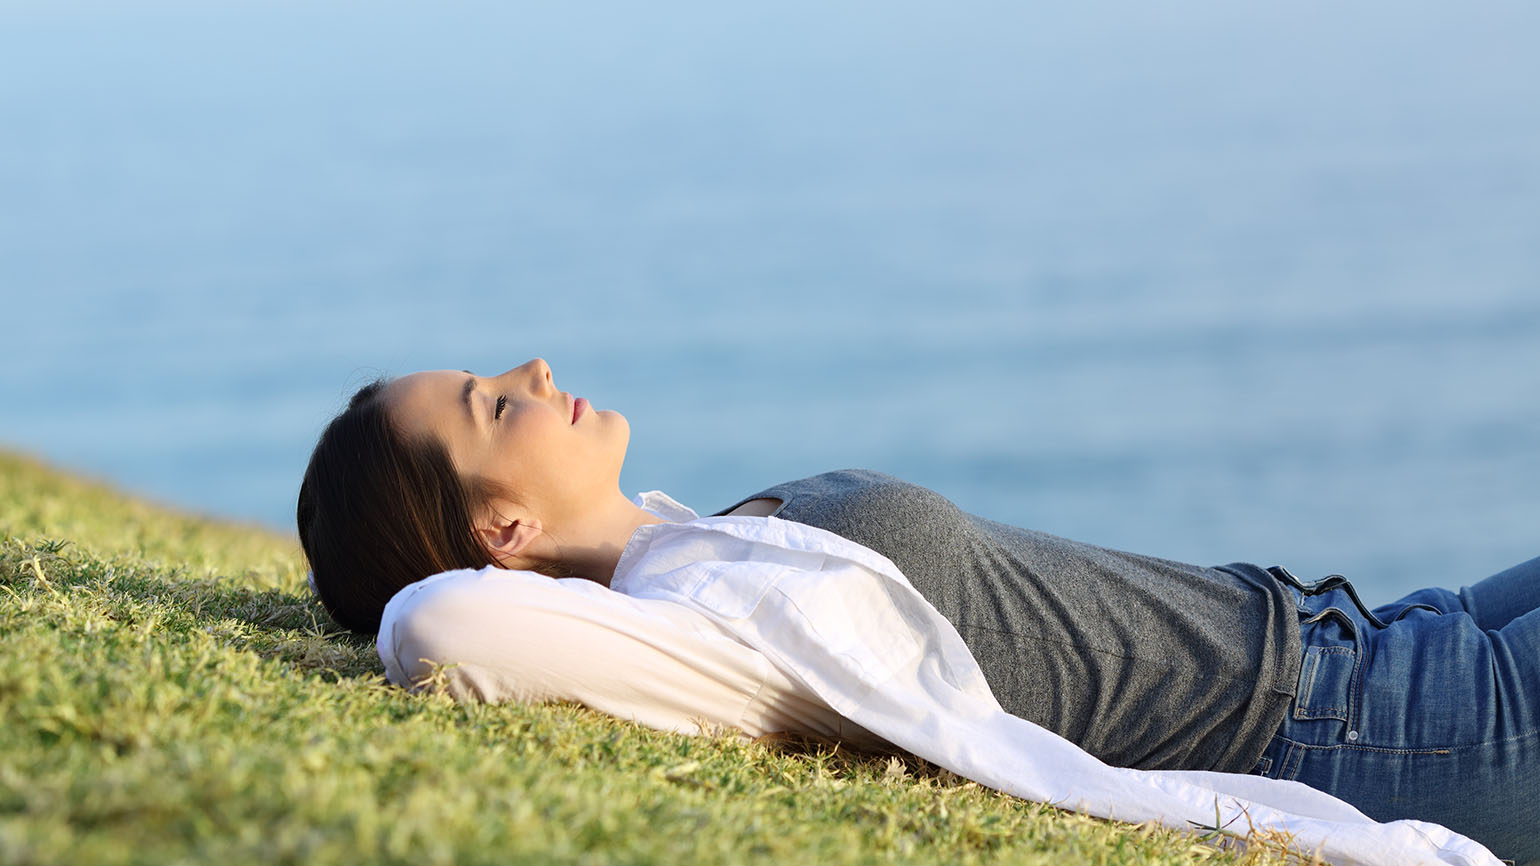 A woman in a grey T-shirt and jeans with a a white coverup sleeps on a hillside overlooking the ocean as she experiences spiritual serenity.